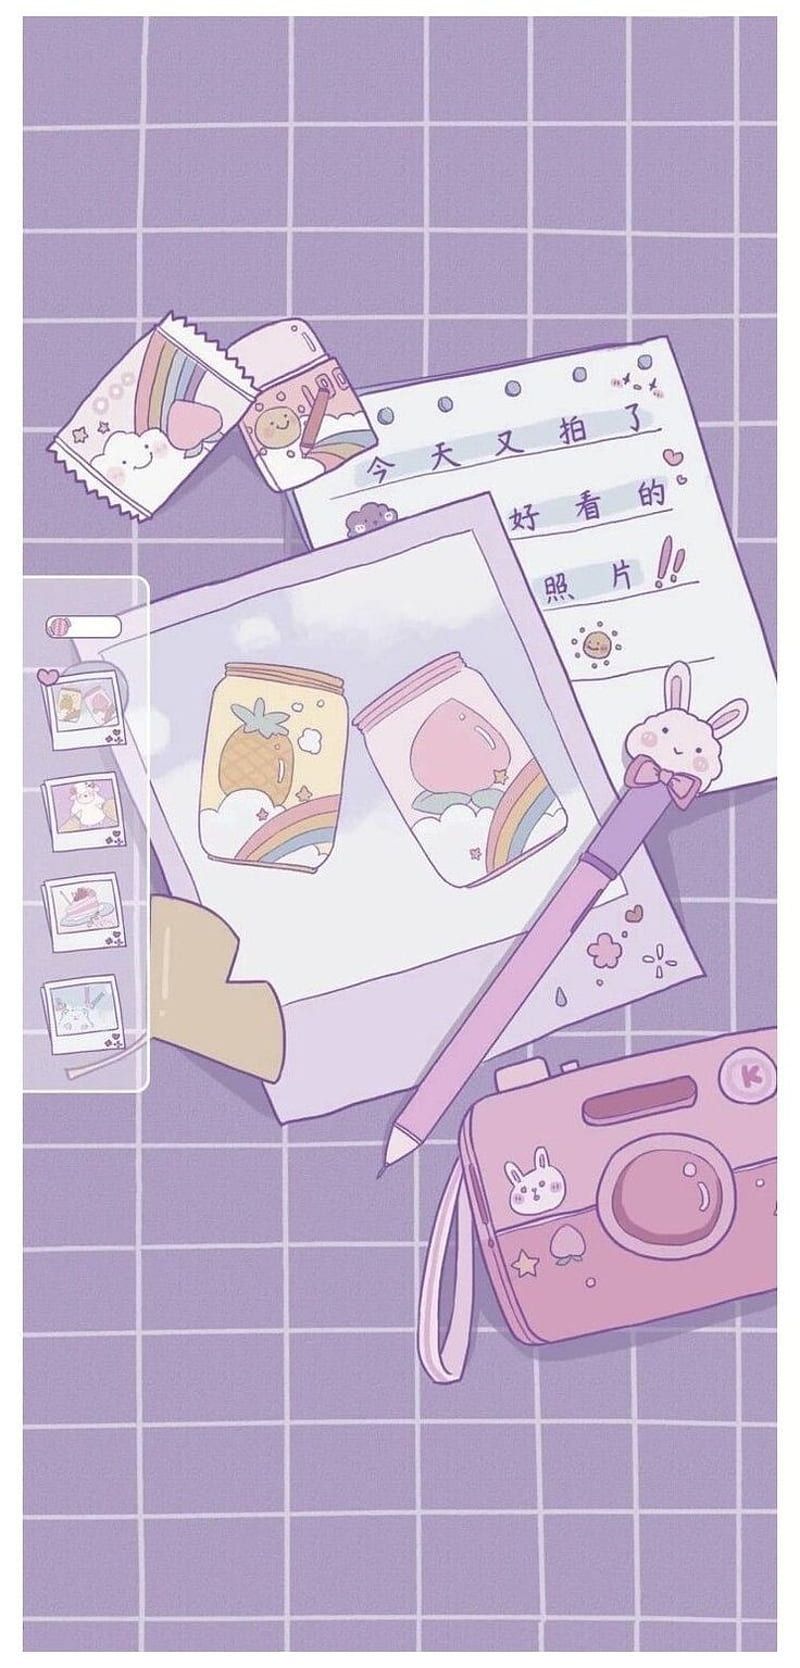 Aesthetic phone background with a camera, polaroid pictures, and a note pad - Cute purple, illustration, kawaii, milk, school